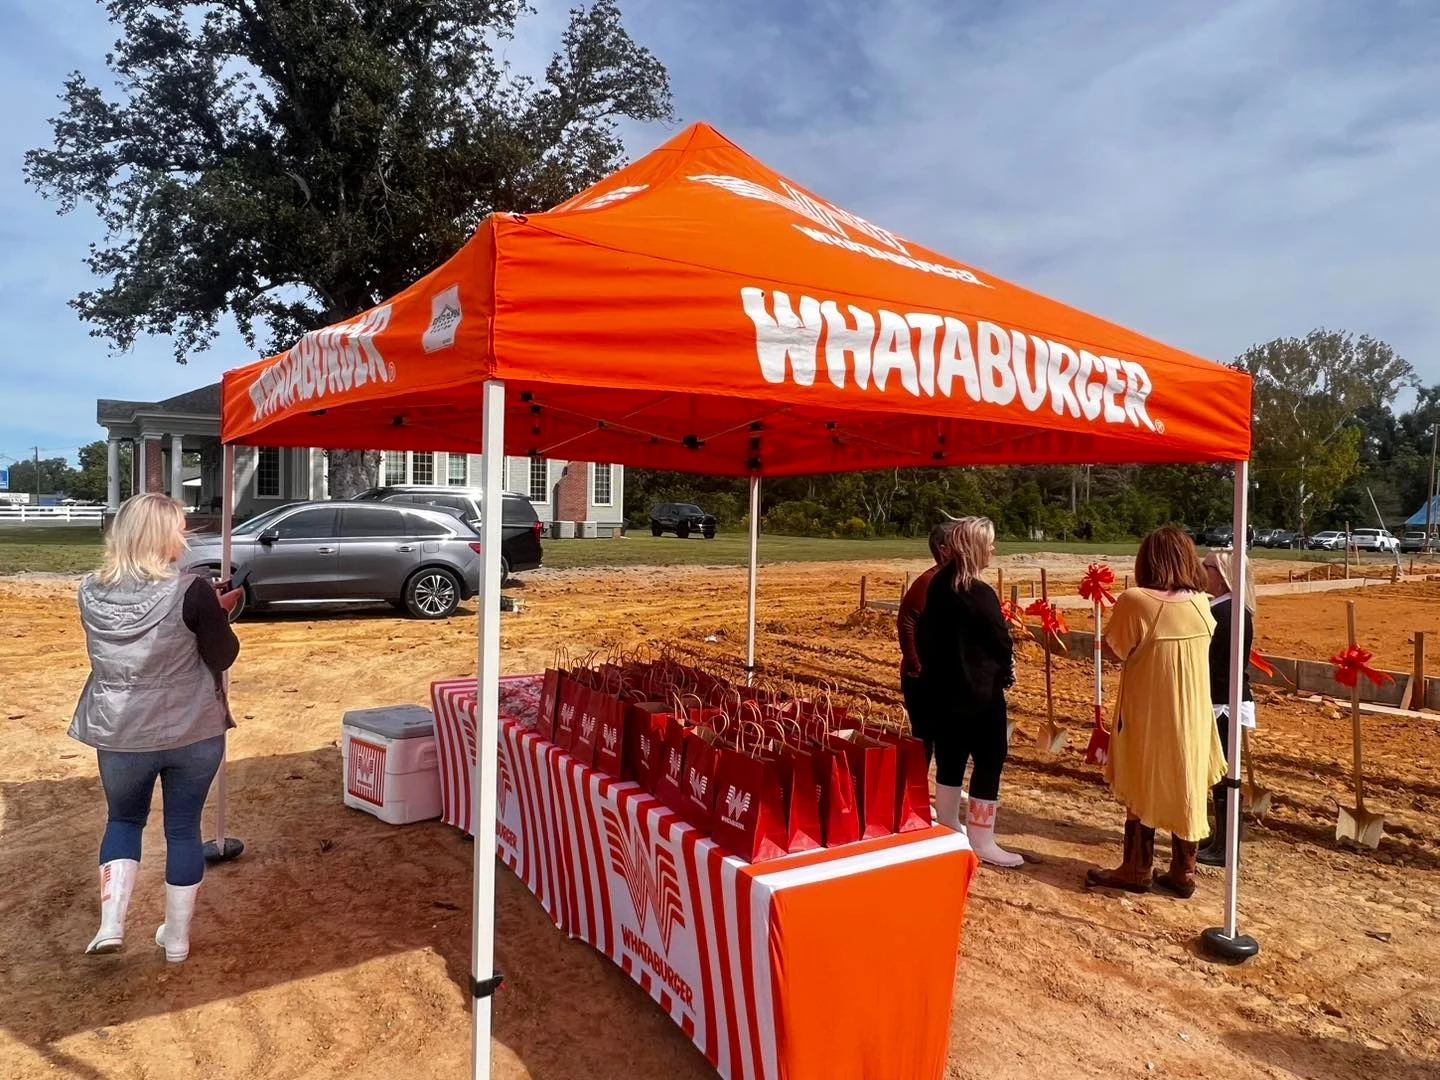 Whataburger serving people one hamburger at a time - Shelby County